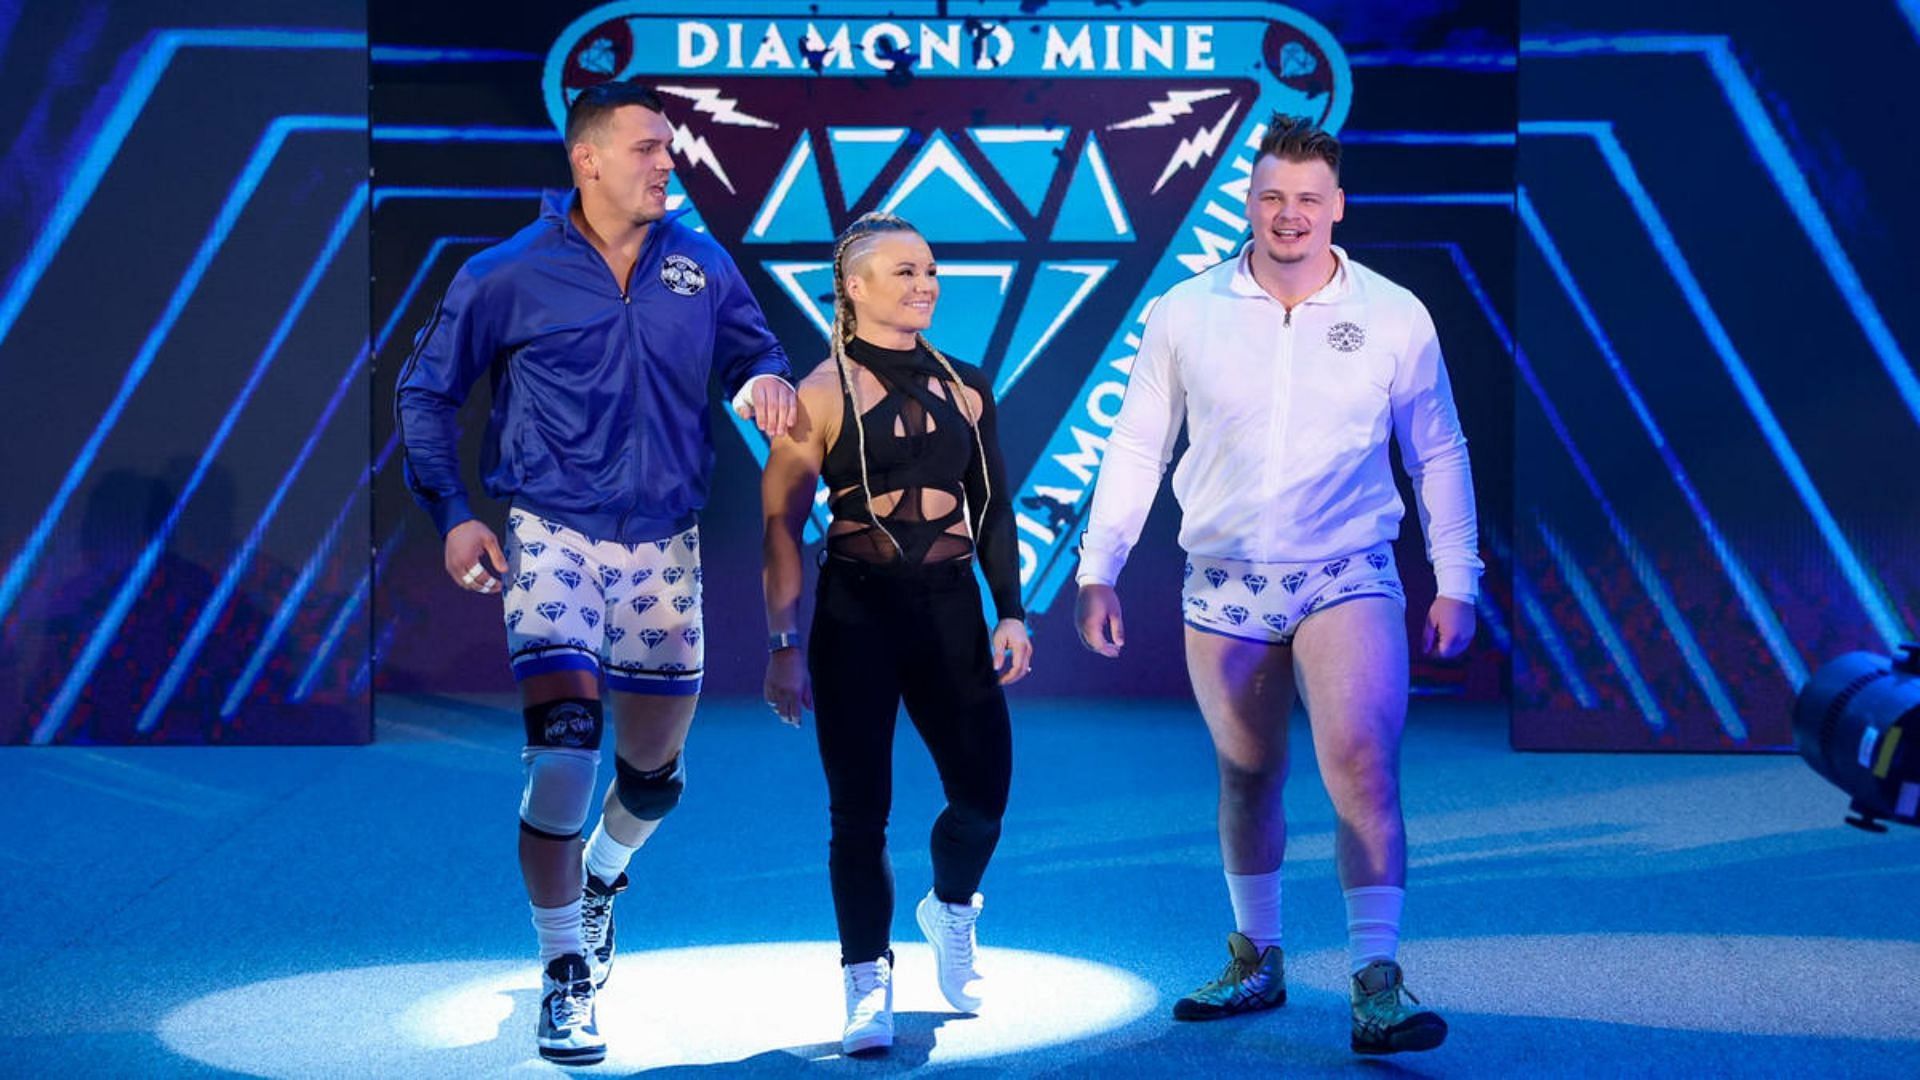 Diamond Mine is one of the latest stables to be formed in WWE